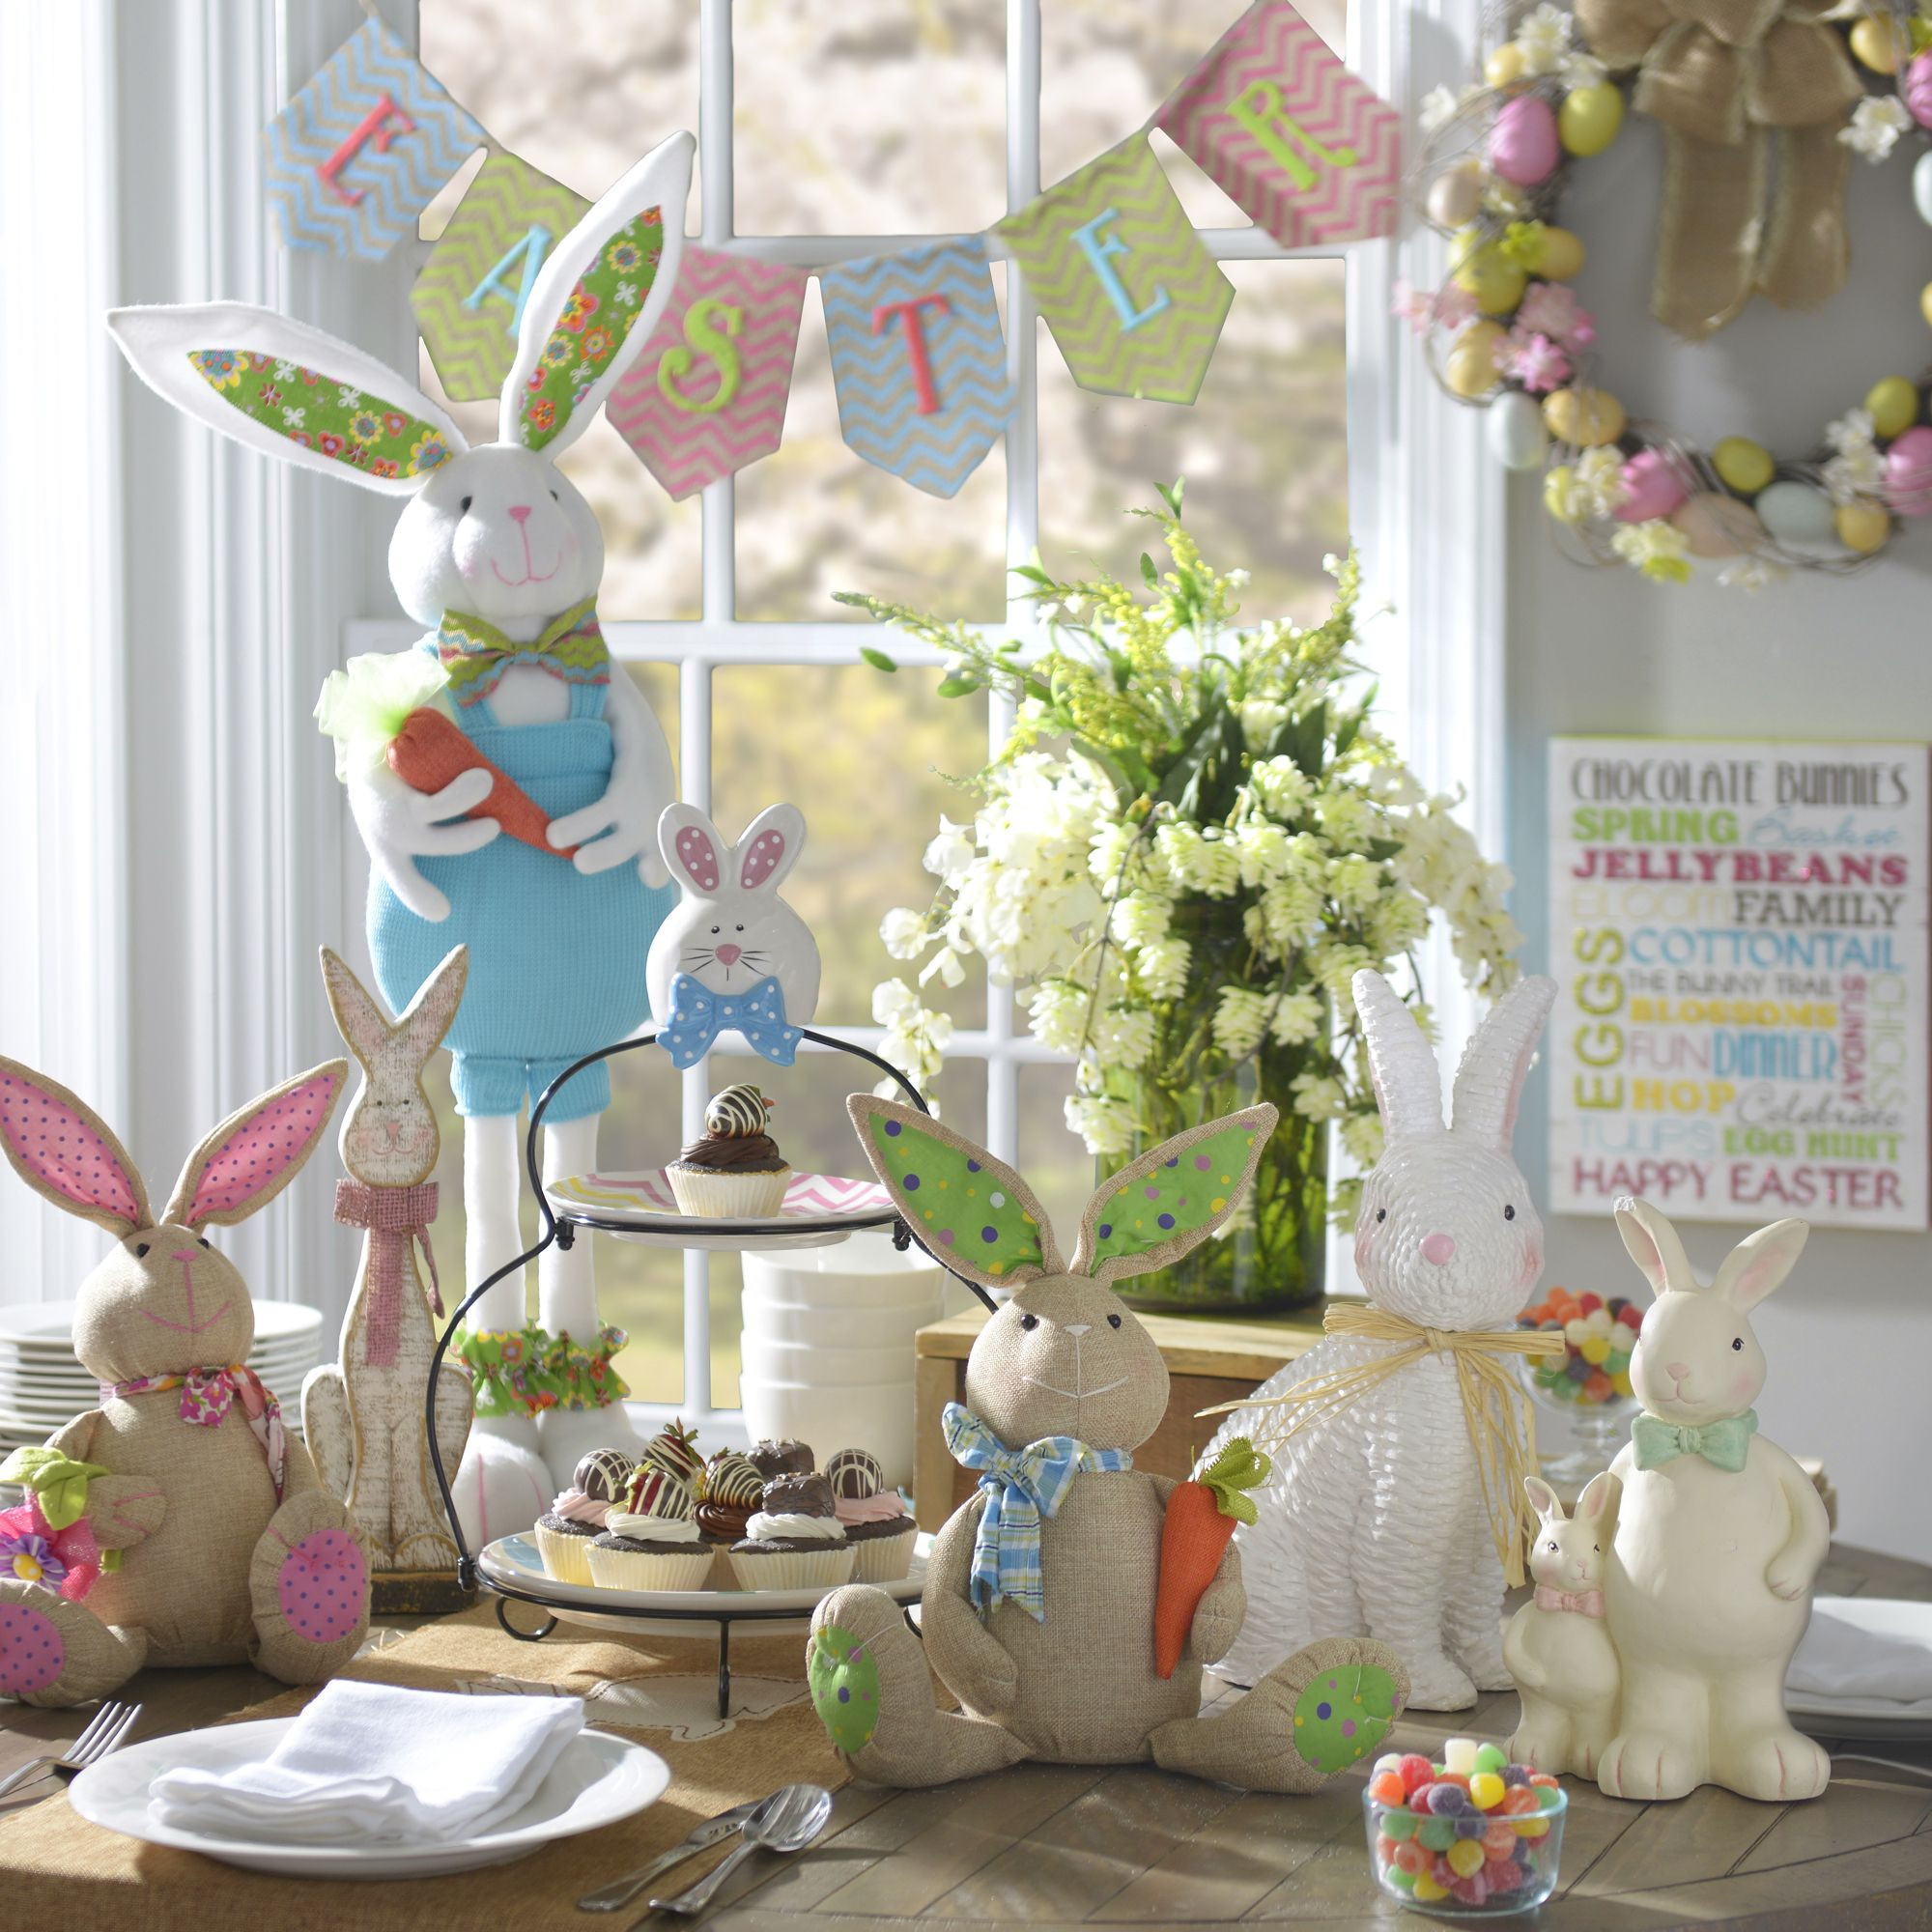 Easter Home Decor
 Count on Kirkland s for your Easter home decor With